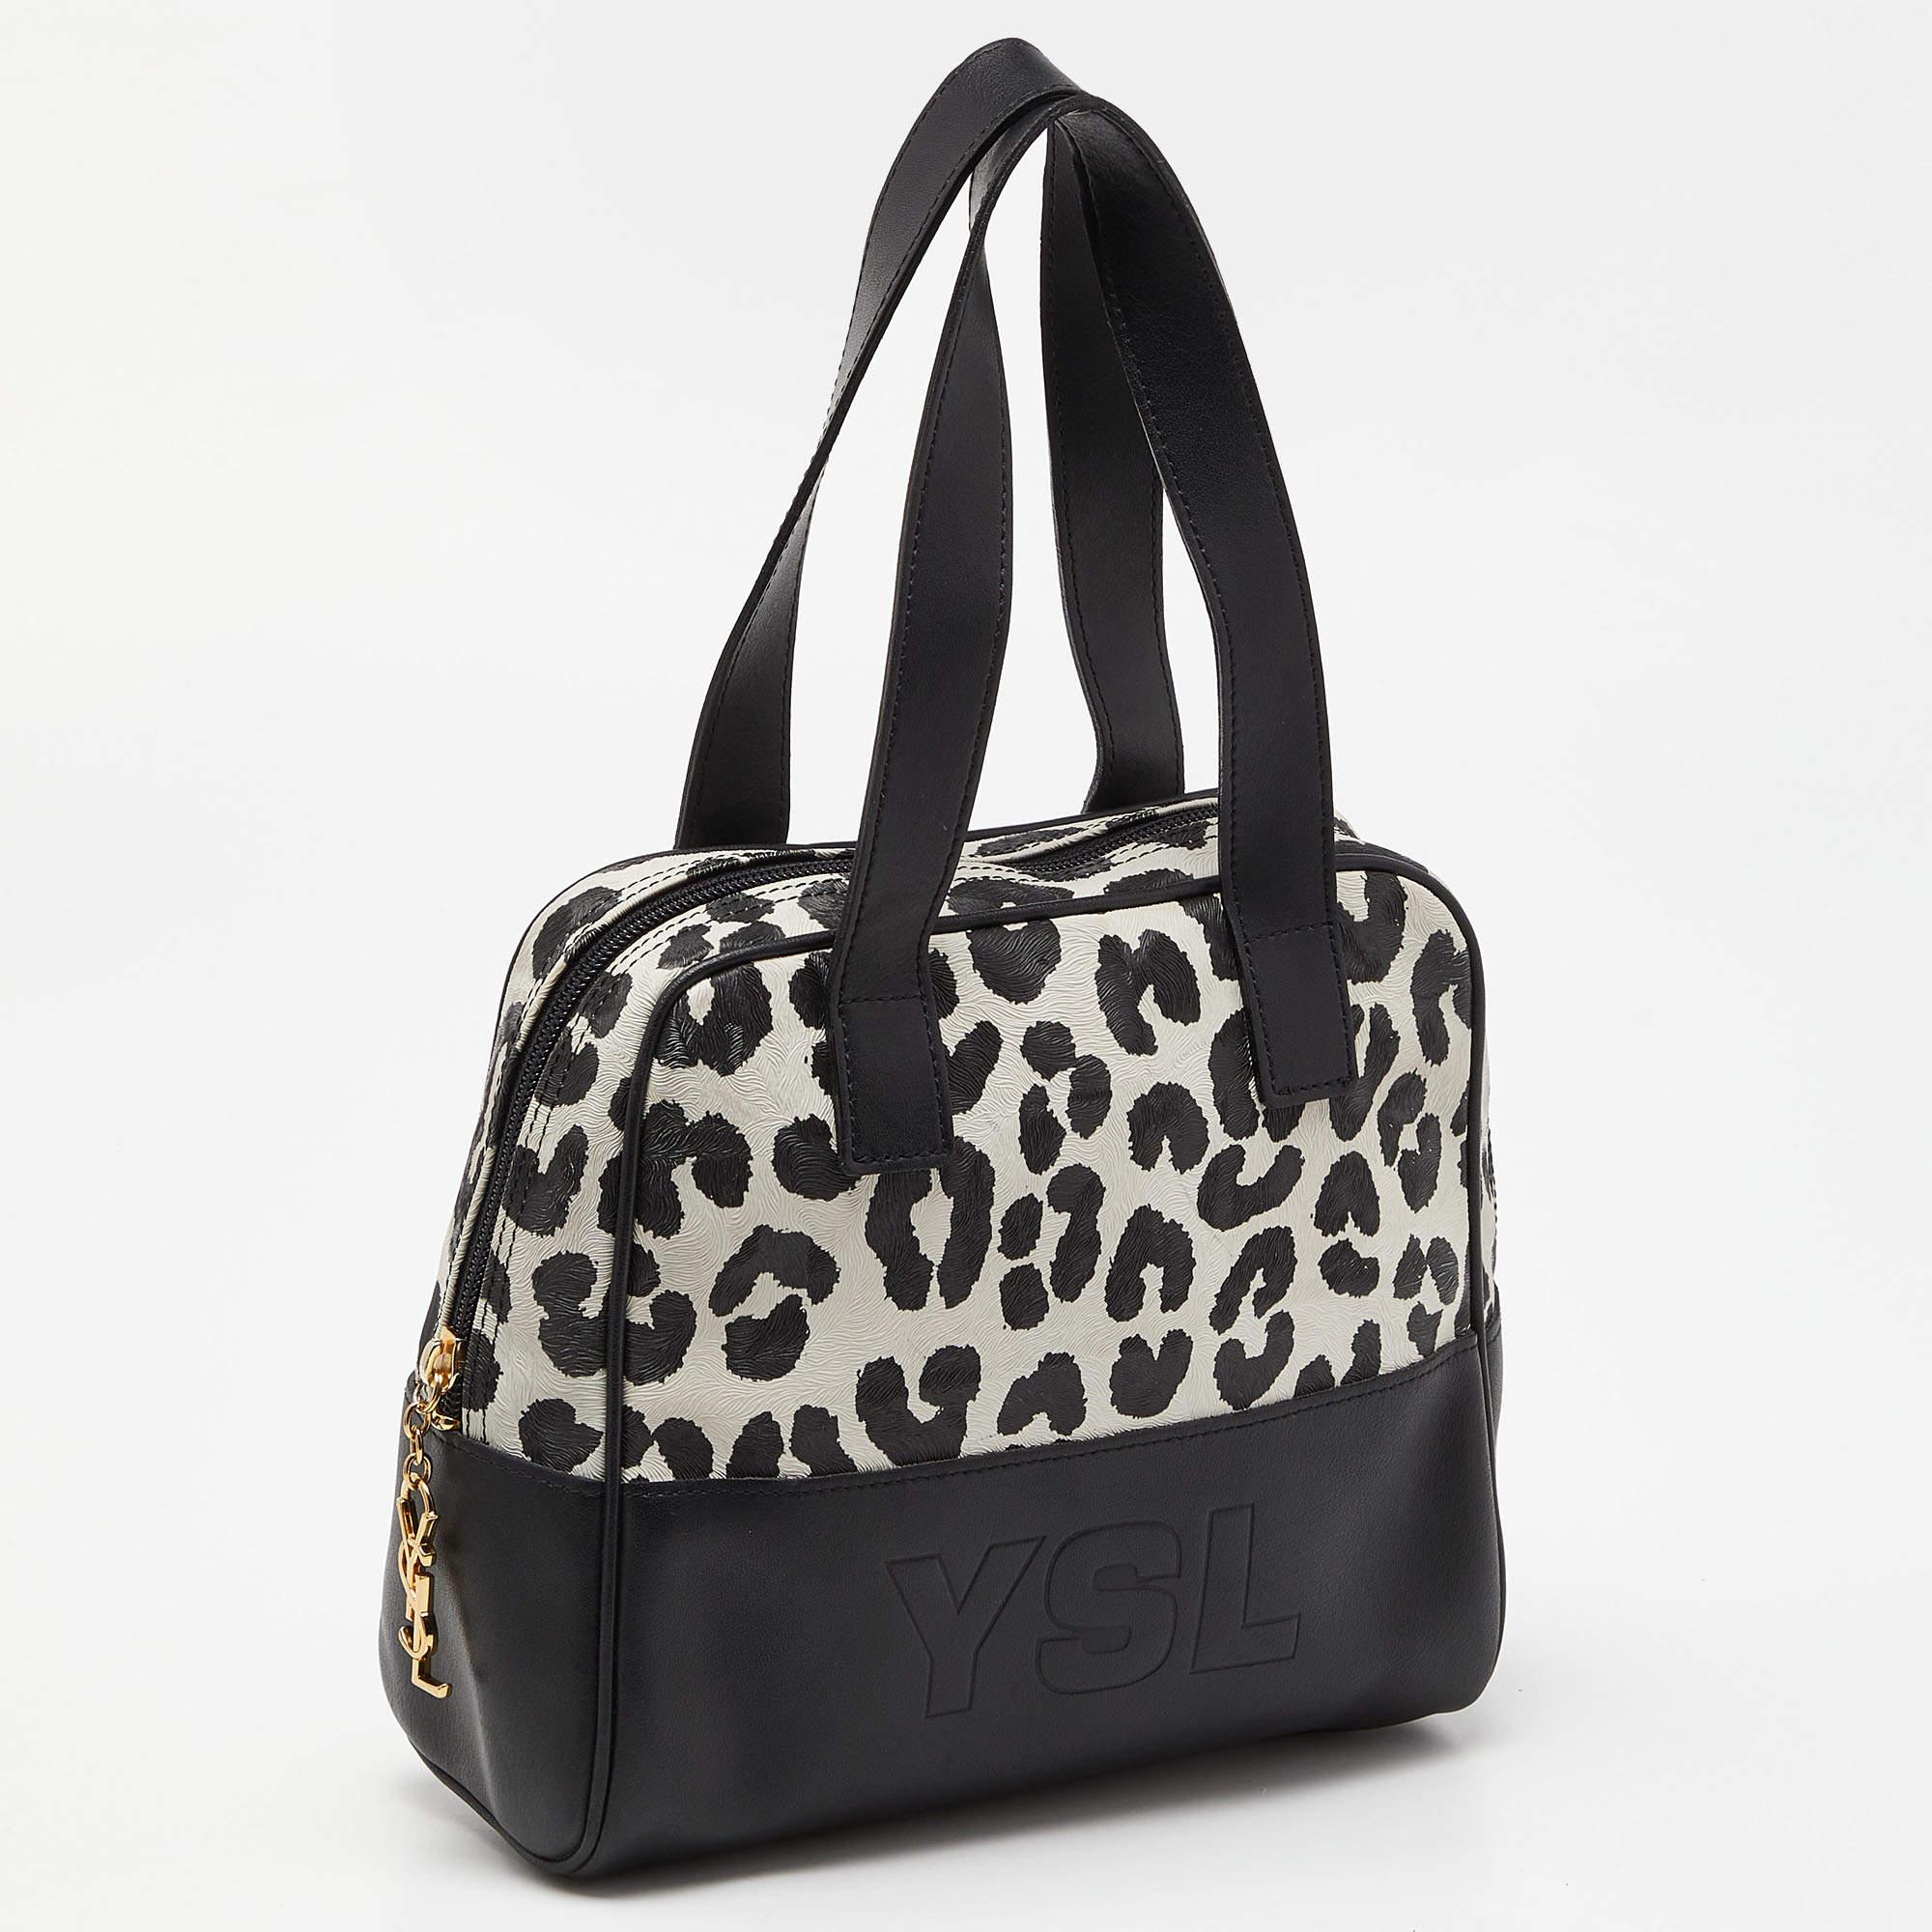 Yves Saint Laurent Black/White Leopard Print Coated Canvas and Leather Satchel For Sale 6